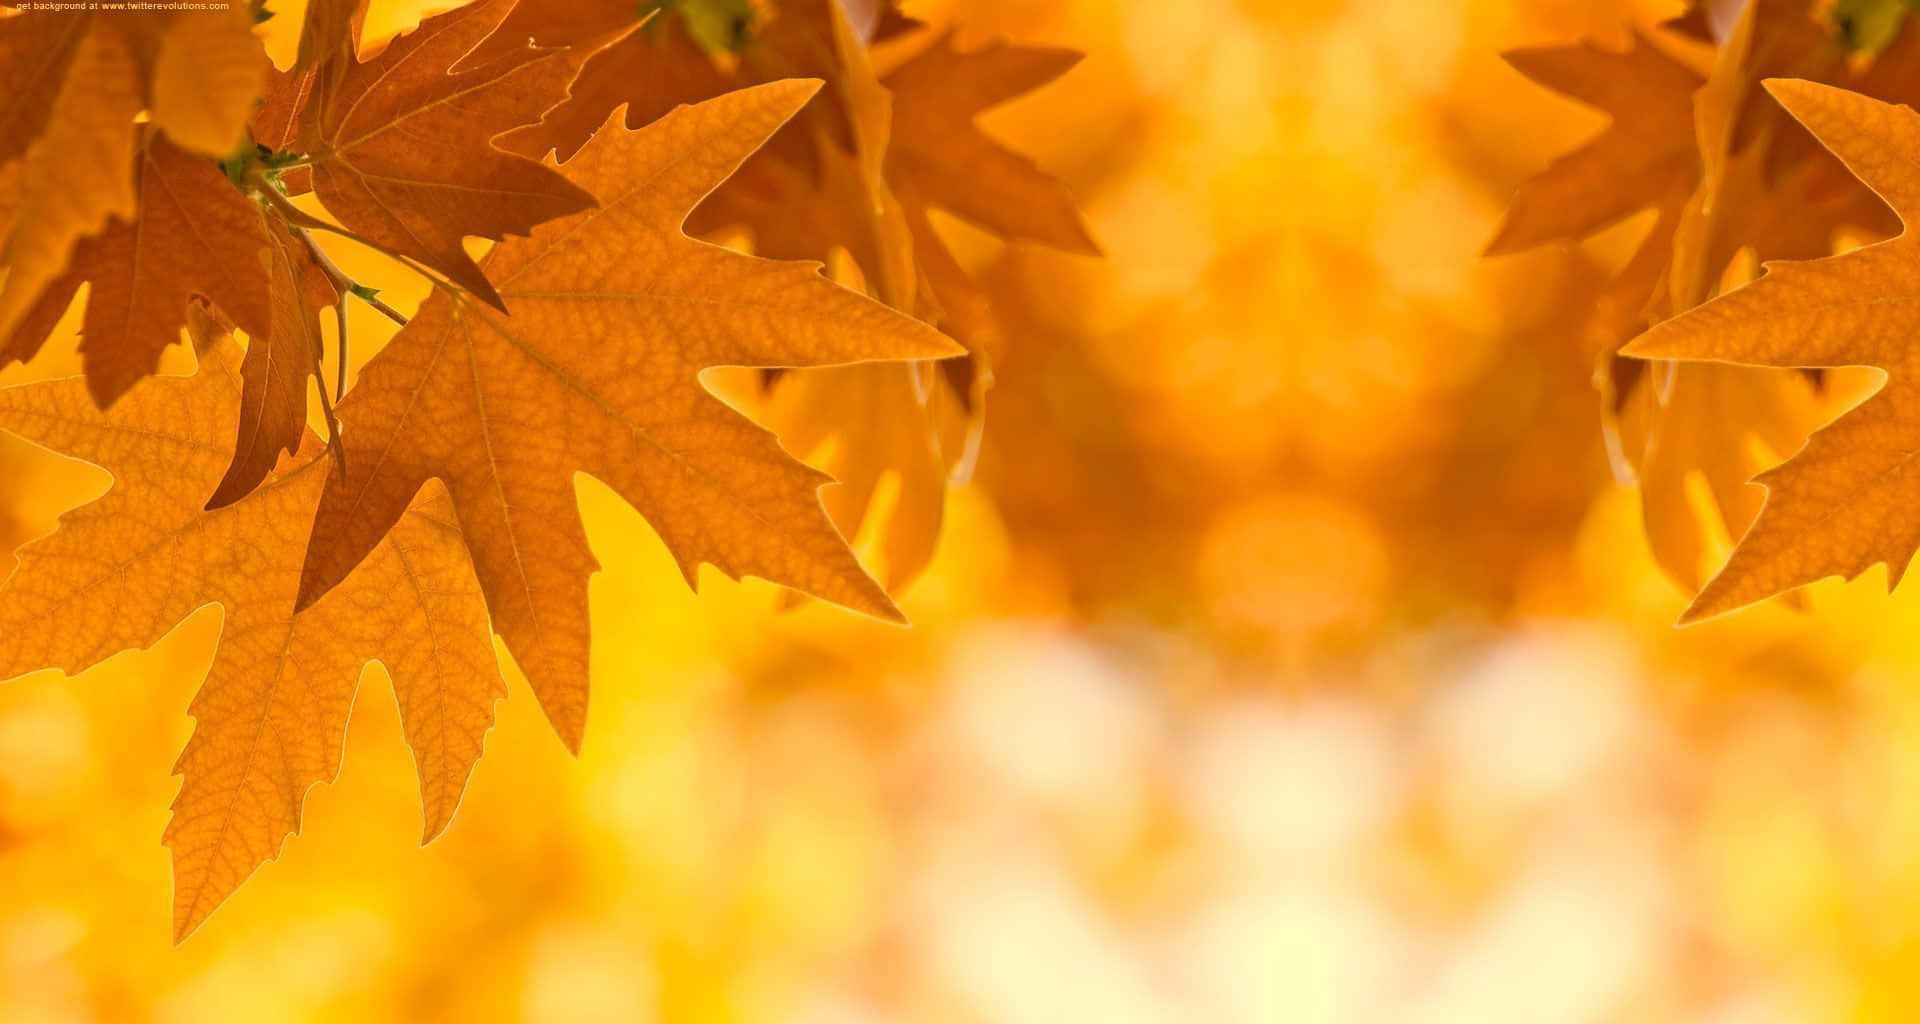 See the beauty of nature with these stunning fall leaves